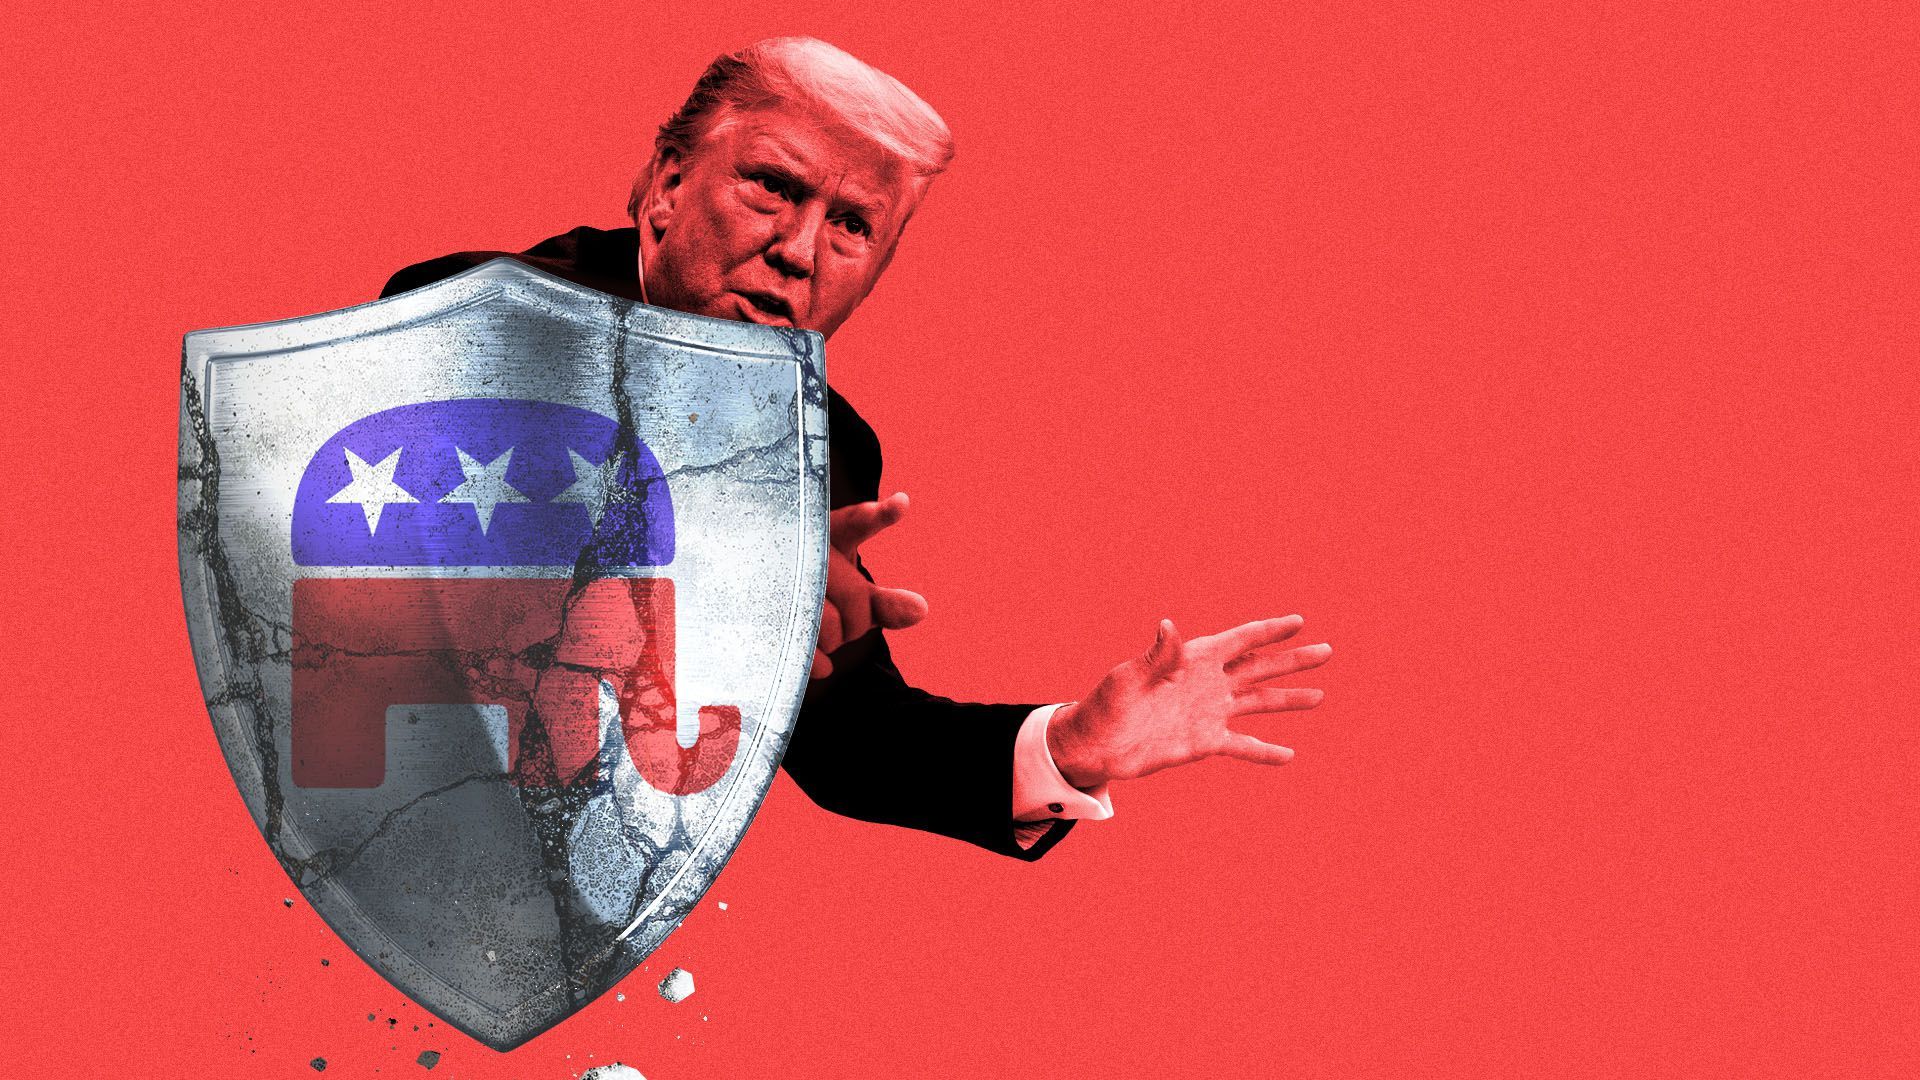 Illustration of President Trump behind a cracking shield with the GOP logo on it